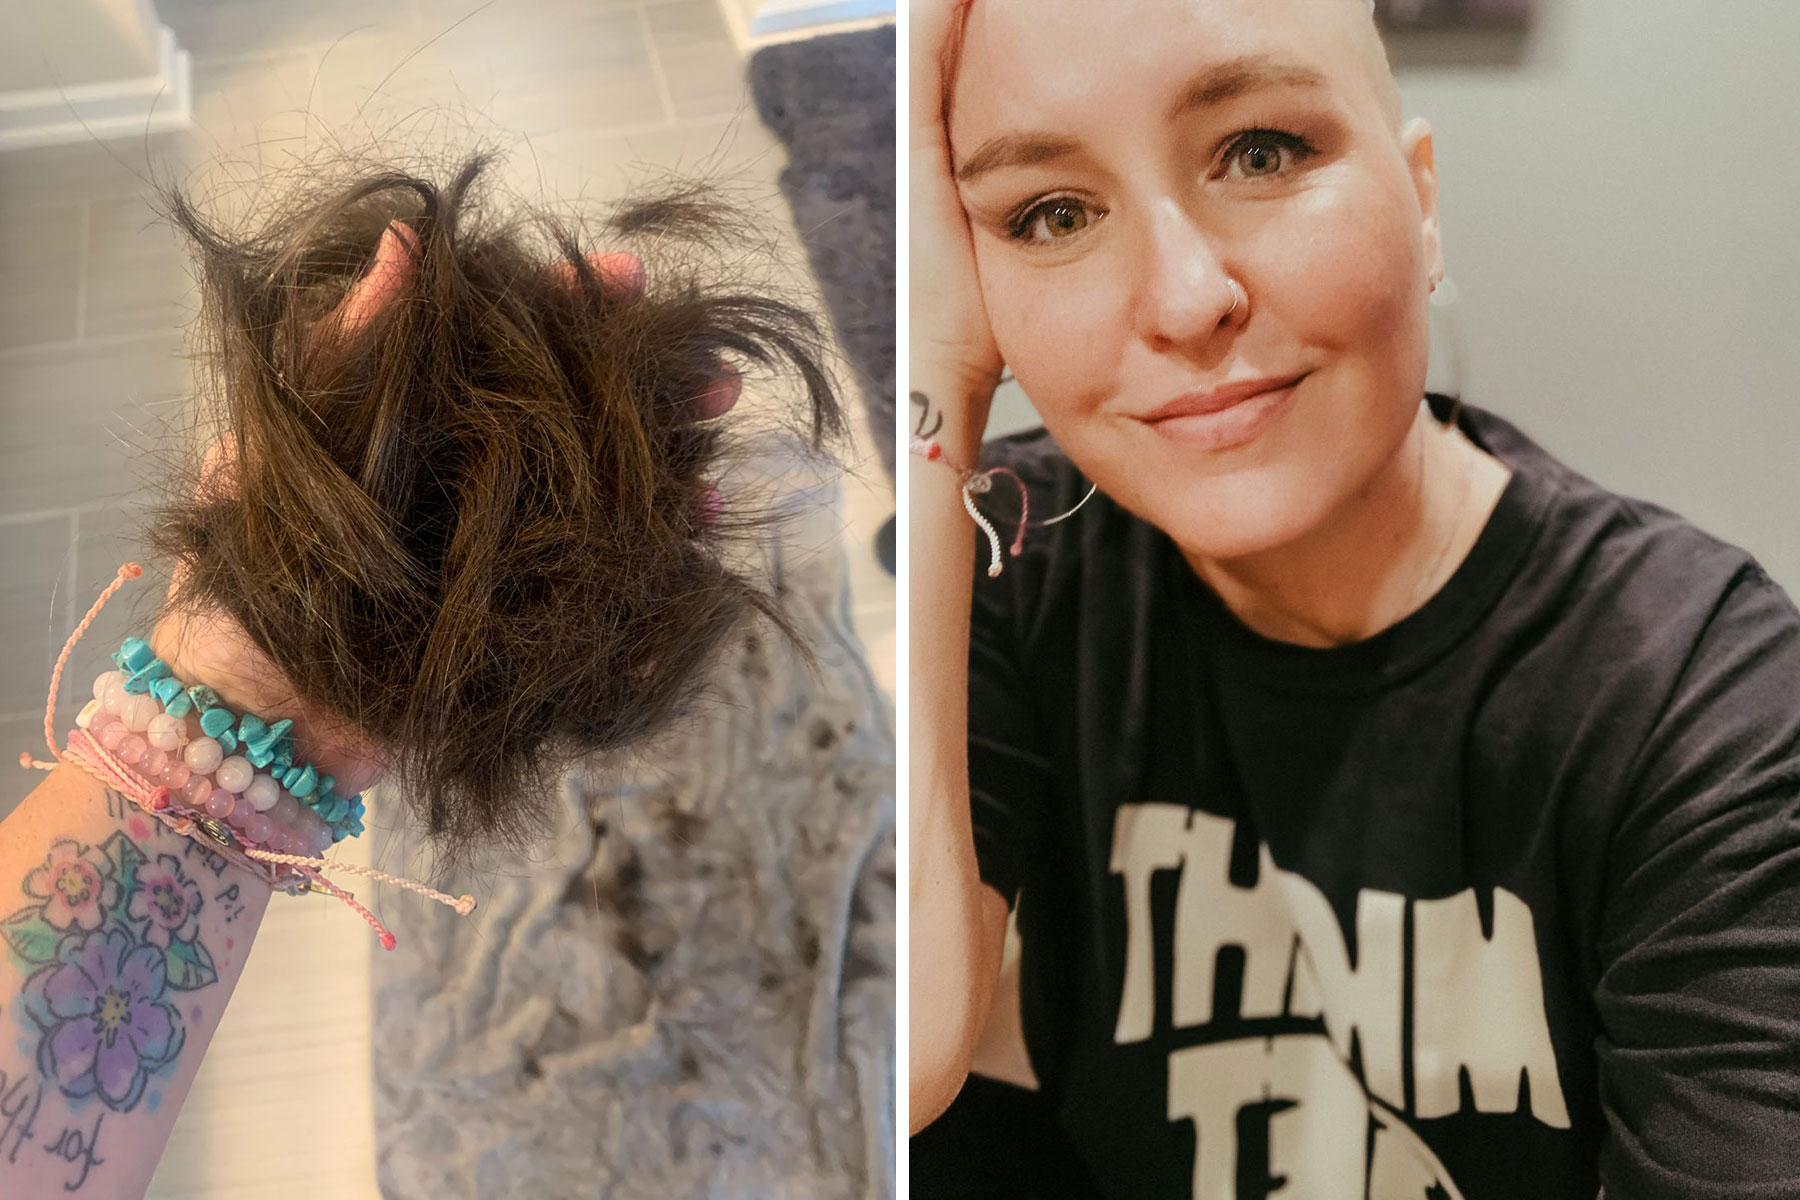 Mary holding hair in her hand, and a close-up of Mary after losing her hair to chemotherapy.